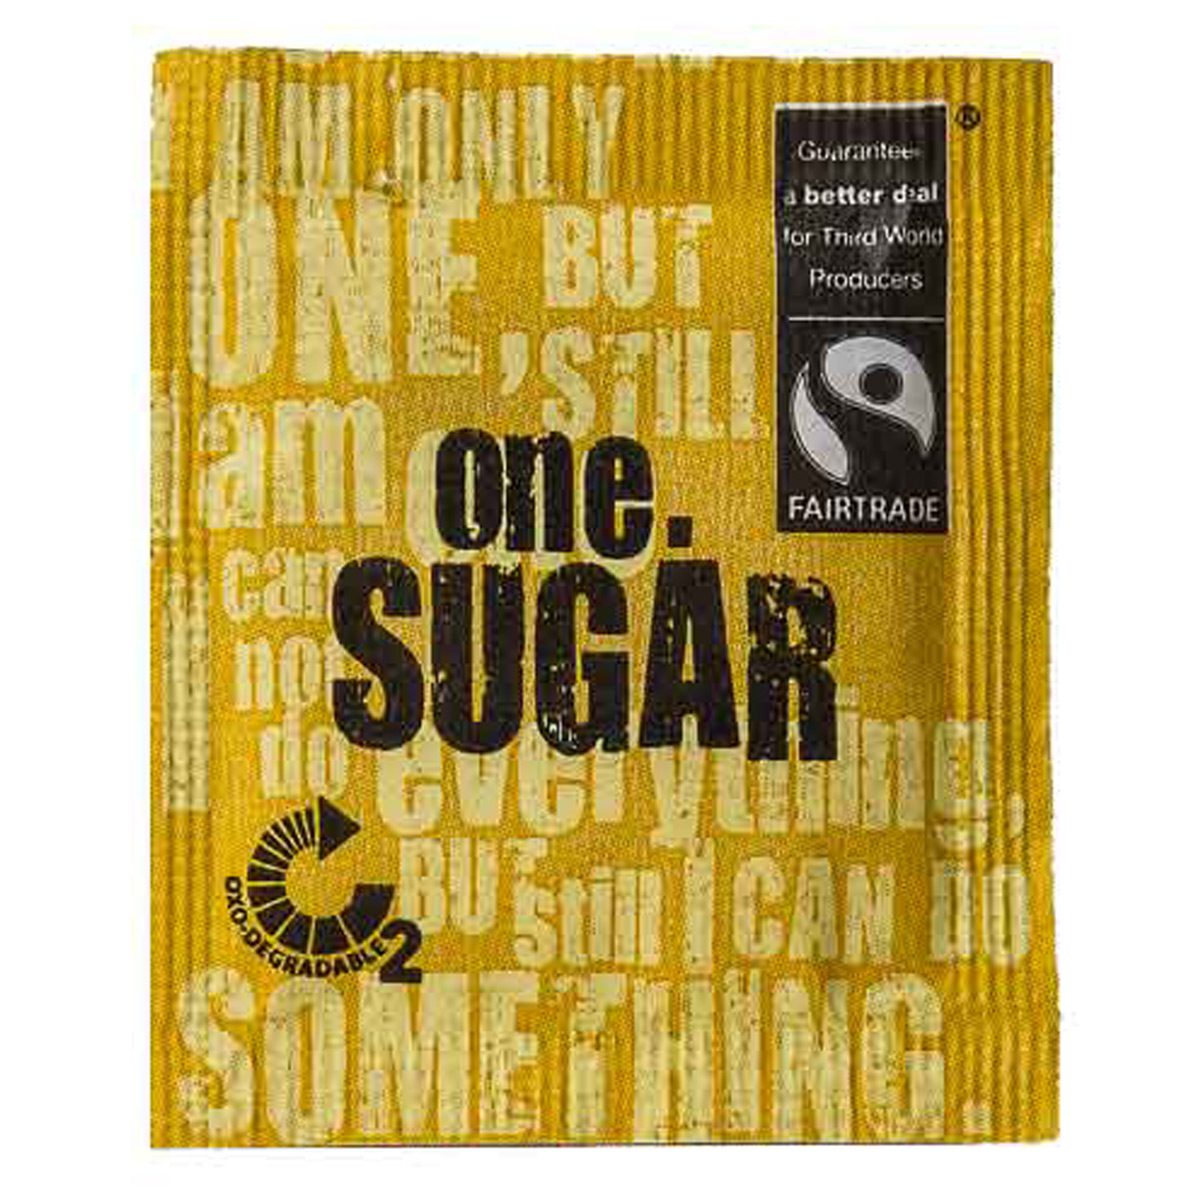 consumables-hospitality-beverage-food-one-fairtrade-sugar-satchets-x2000pk-certified-fairtrade-sugar-packaged-degradable-packaging-film-material-breaks-down-faster-vjs-distributors-ONES